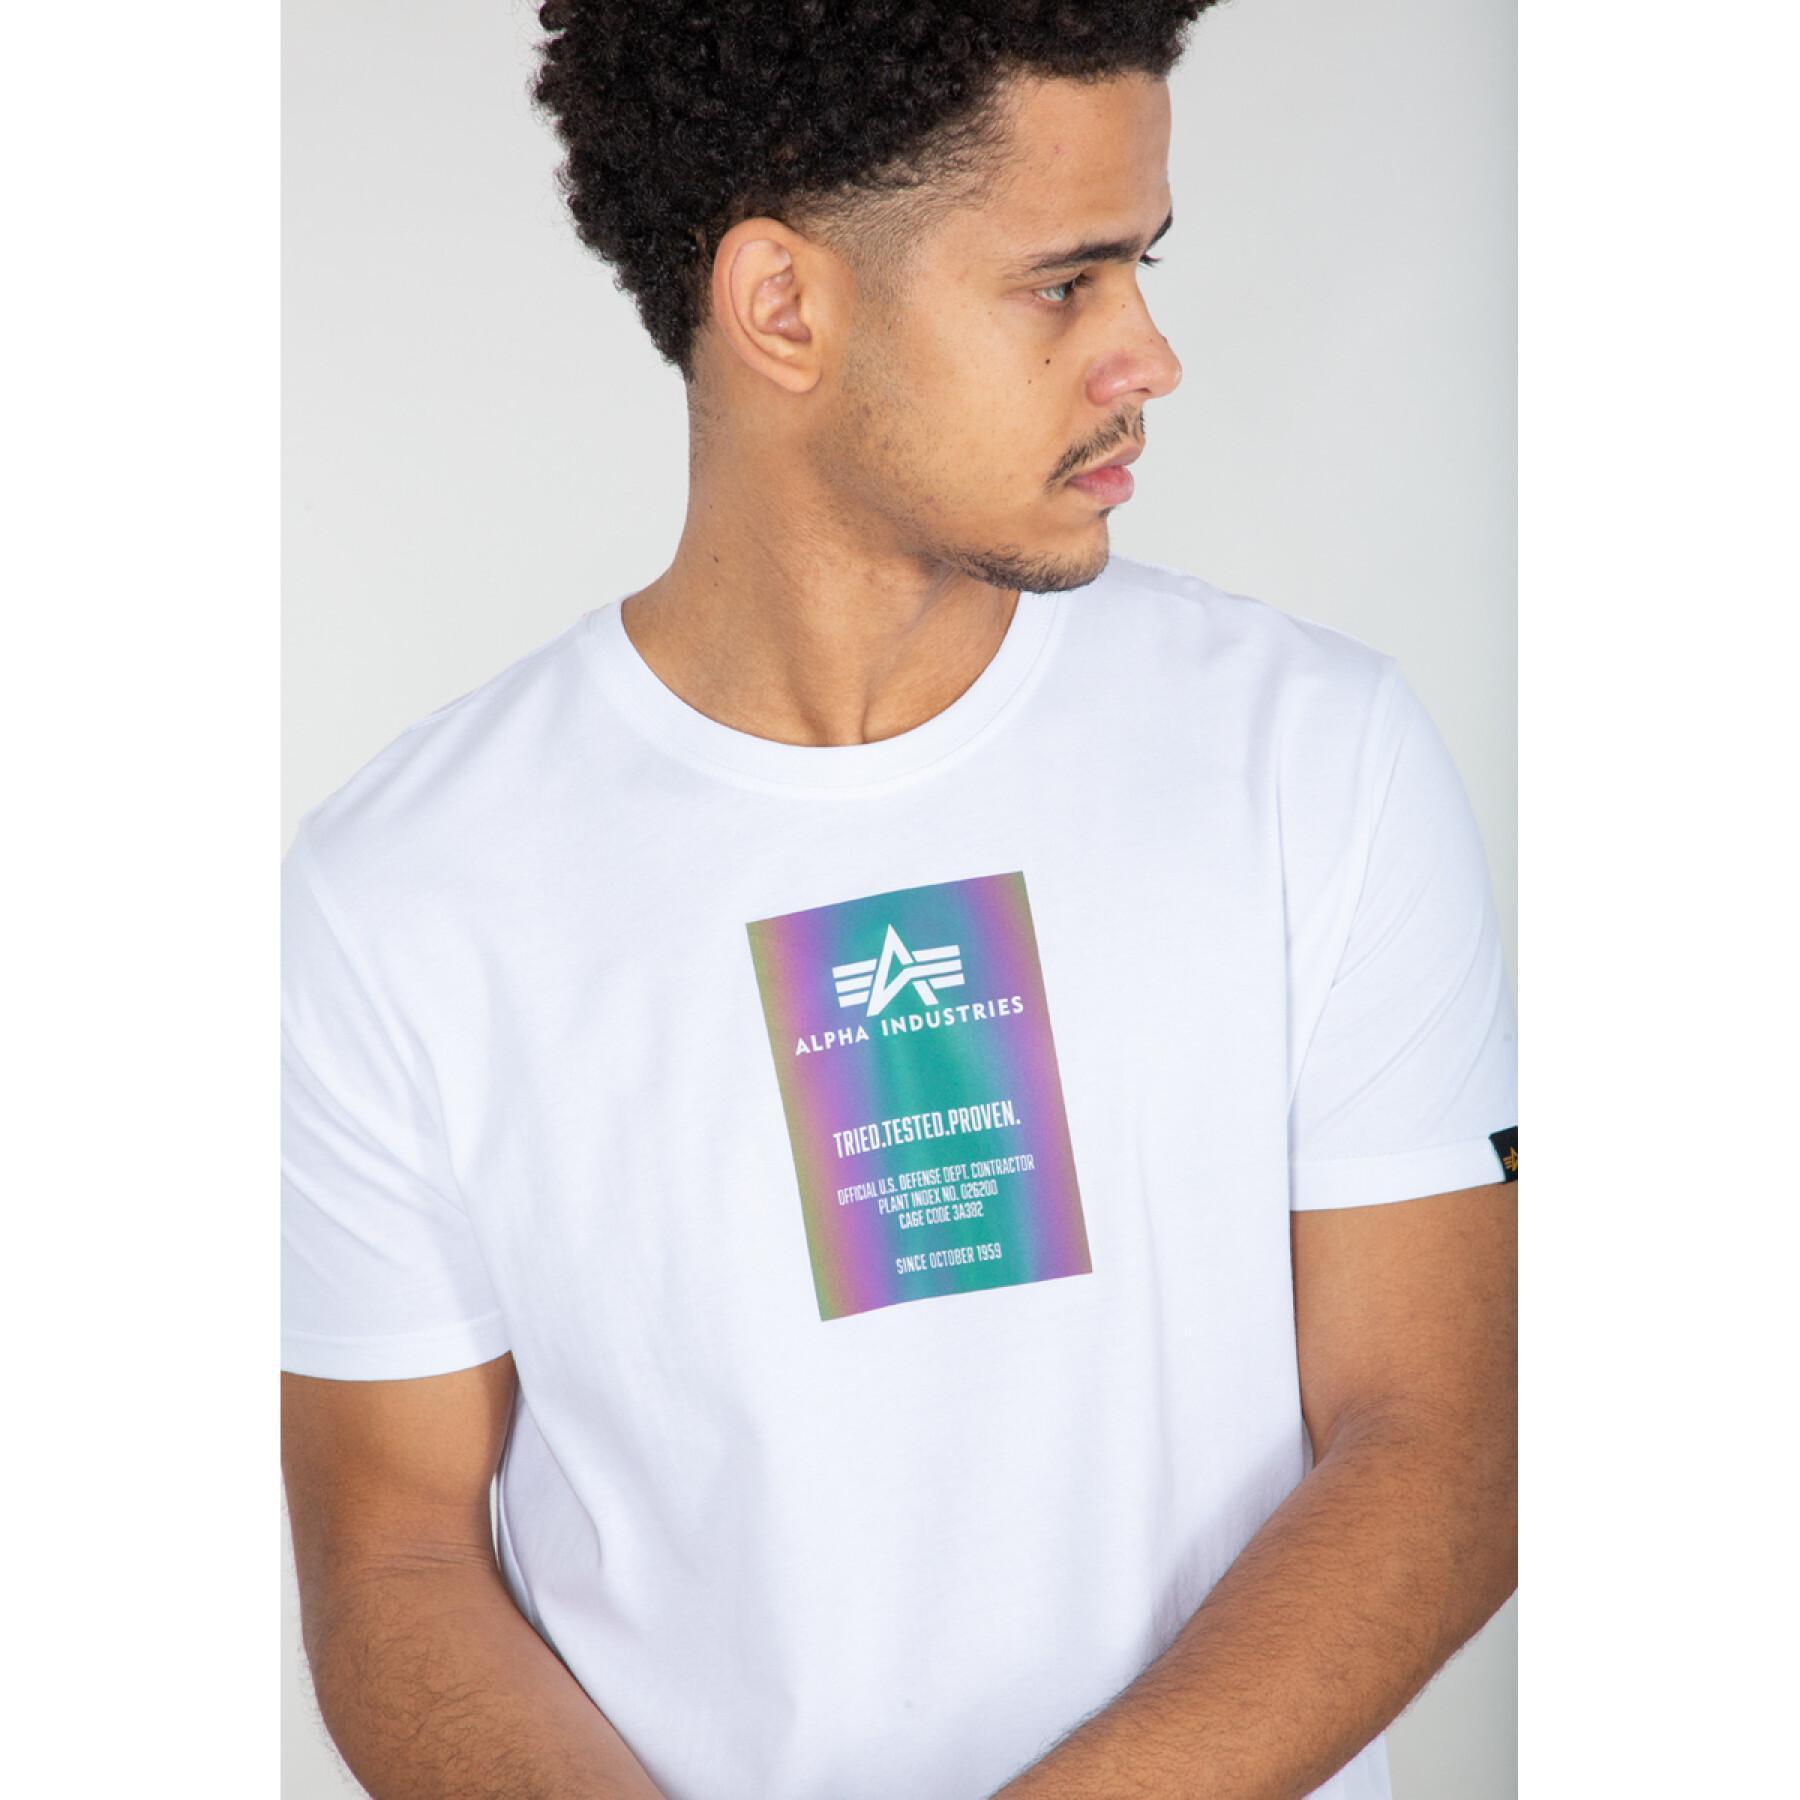 Man - Label Rainbow shirts - T-shirts T-shirt Lifestyle - Polo Alpha Industries and Reflective